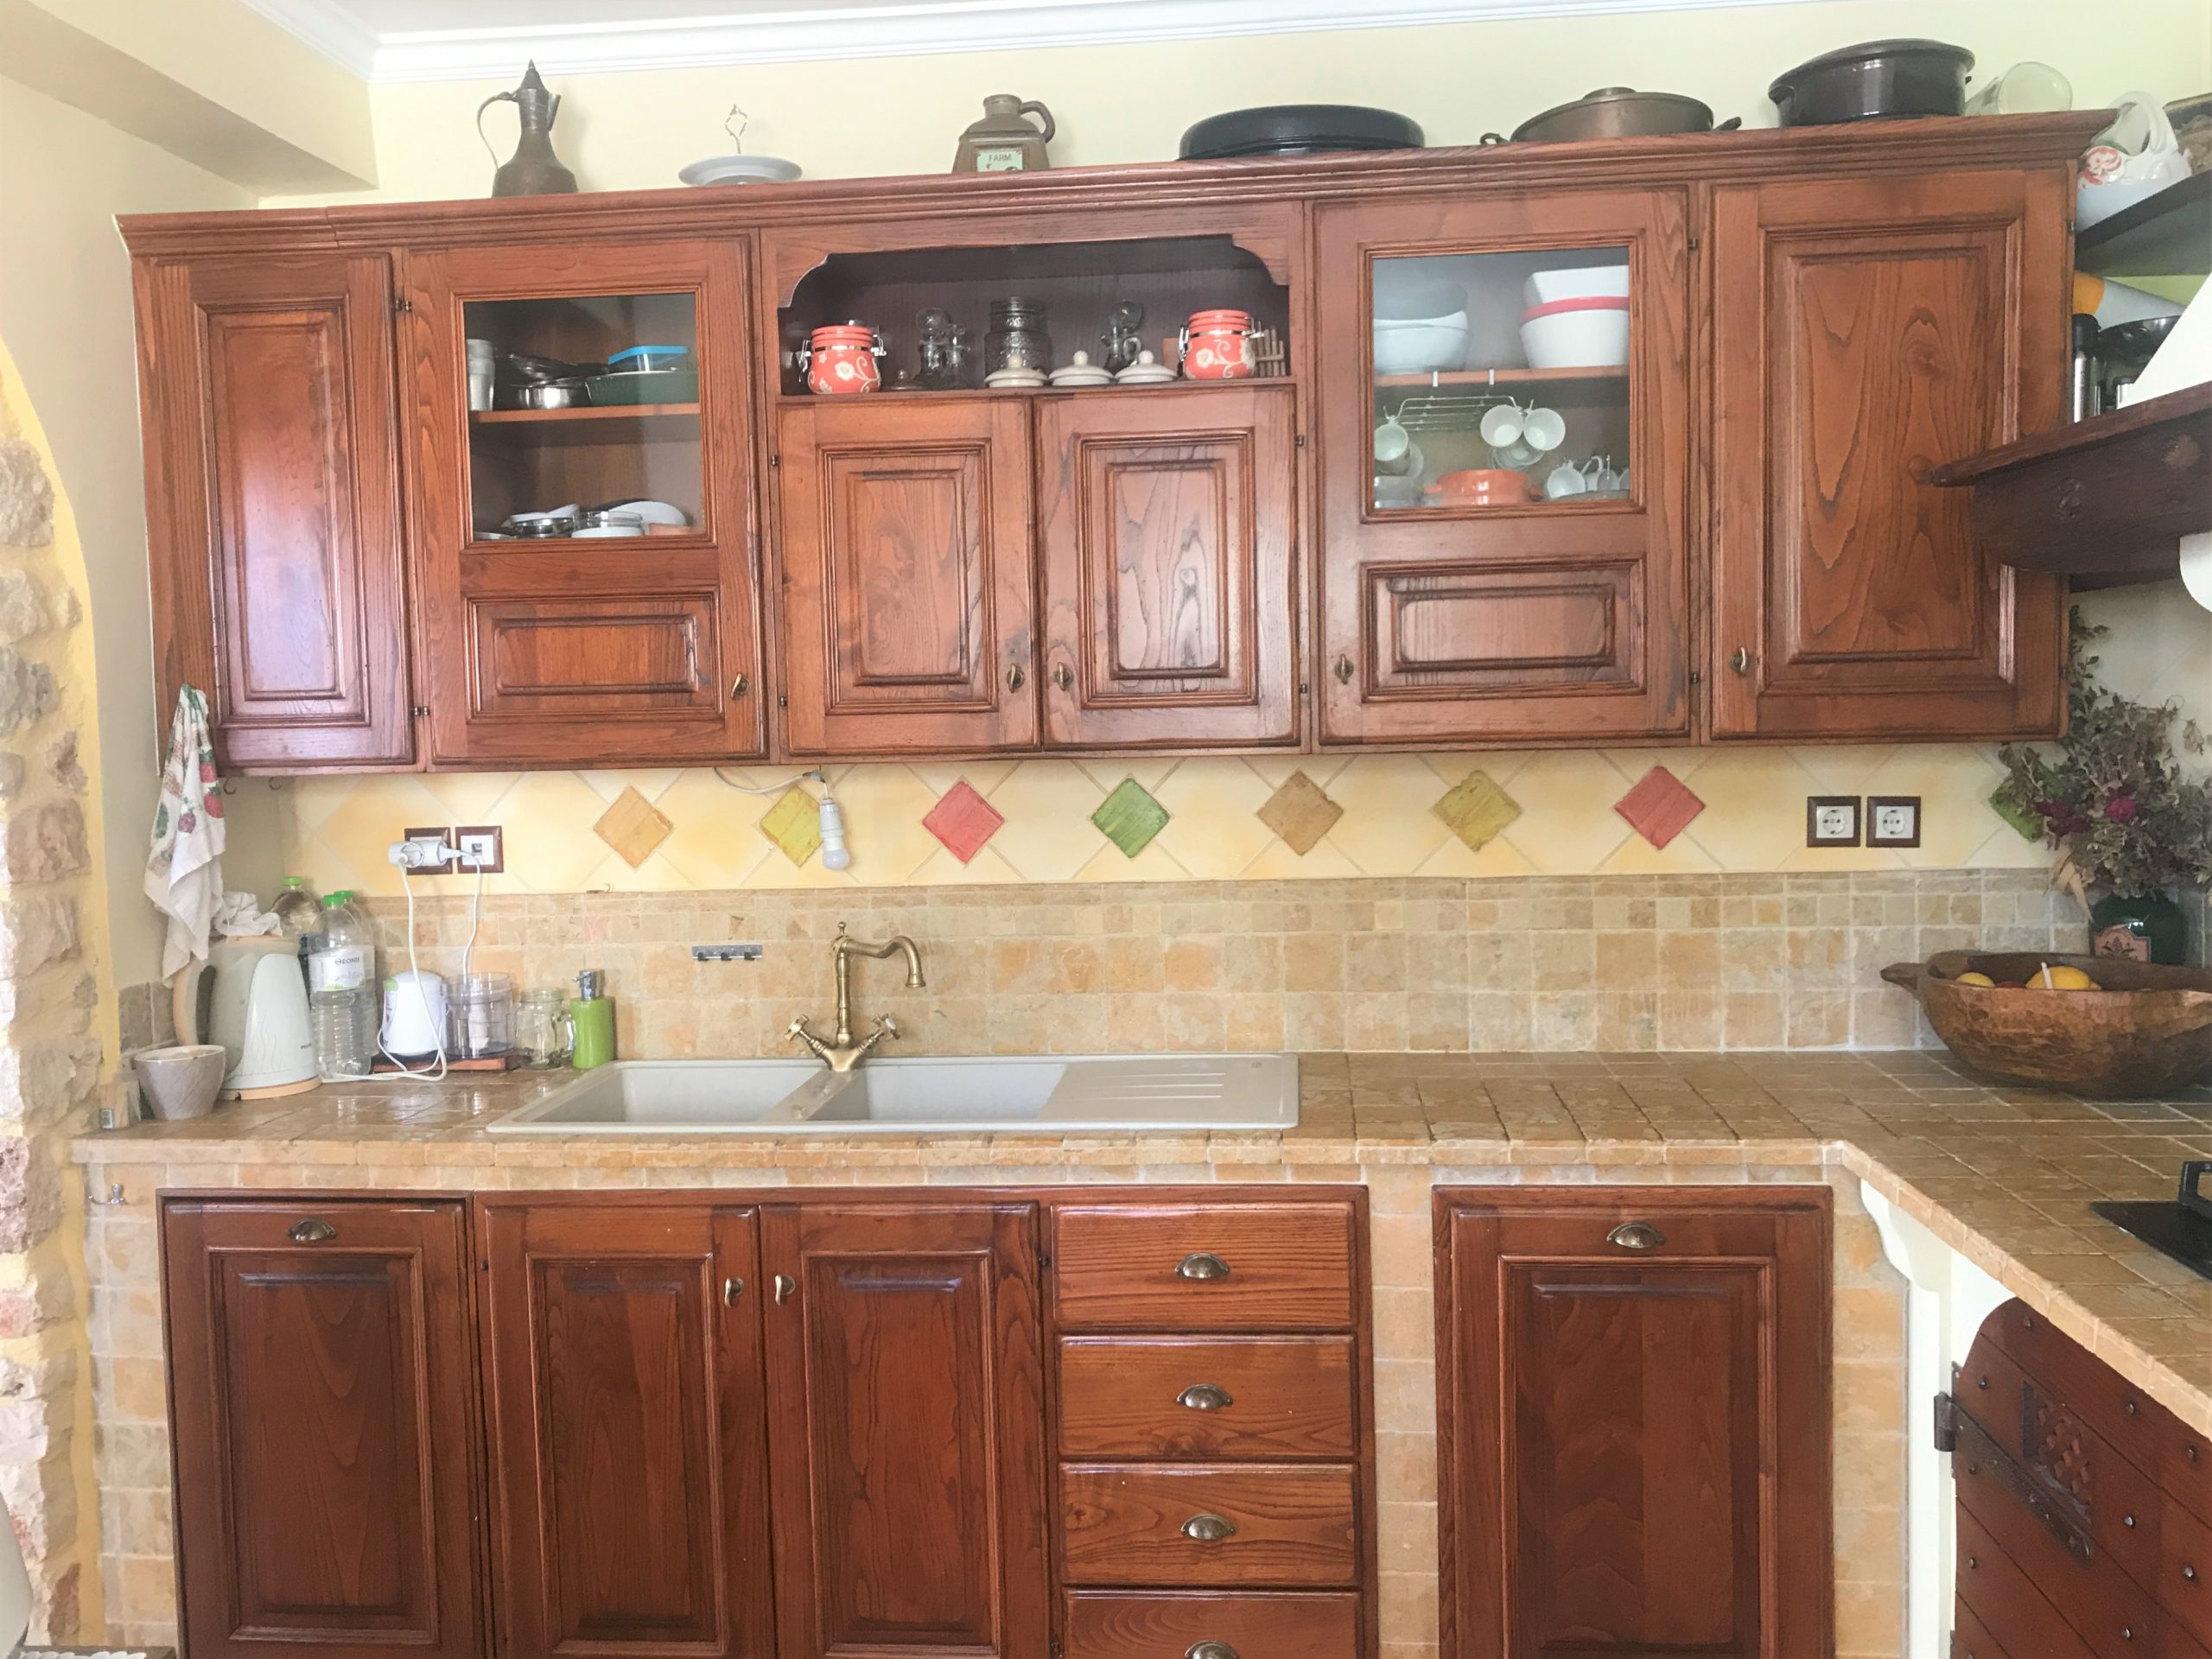 Kitchen of house for rent on Ithaca Greece, Anoghi